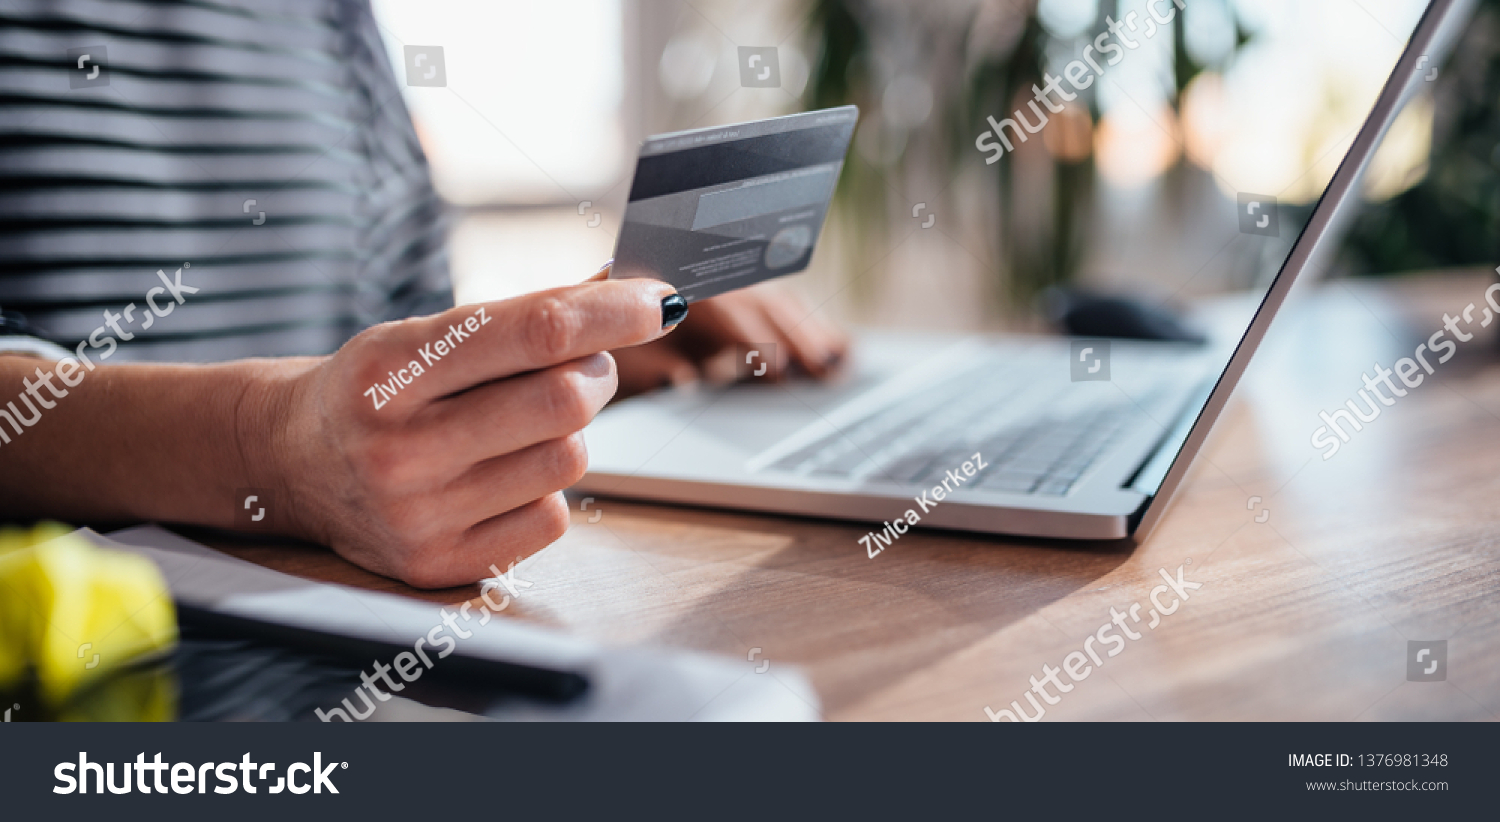 Woman using laptop and shopping online while holding credit card #1376981348